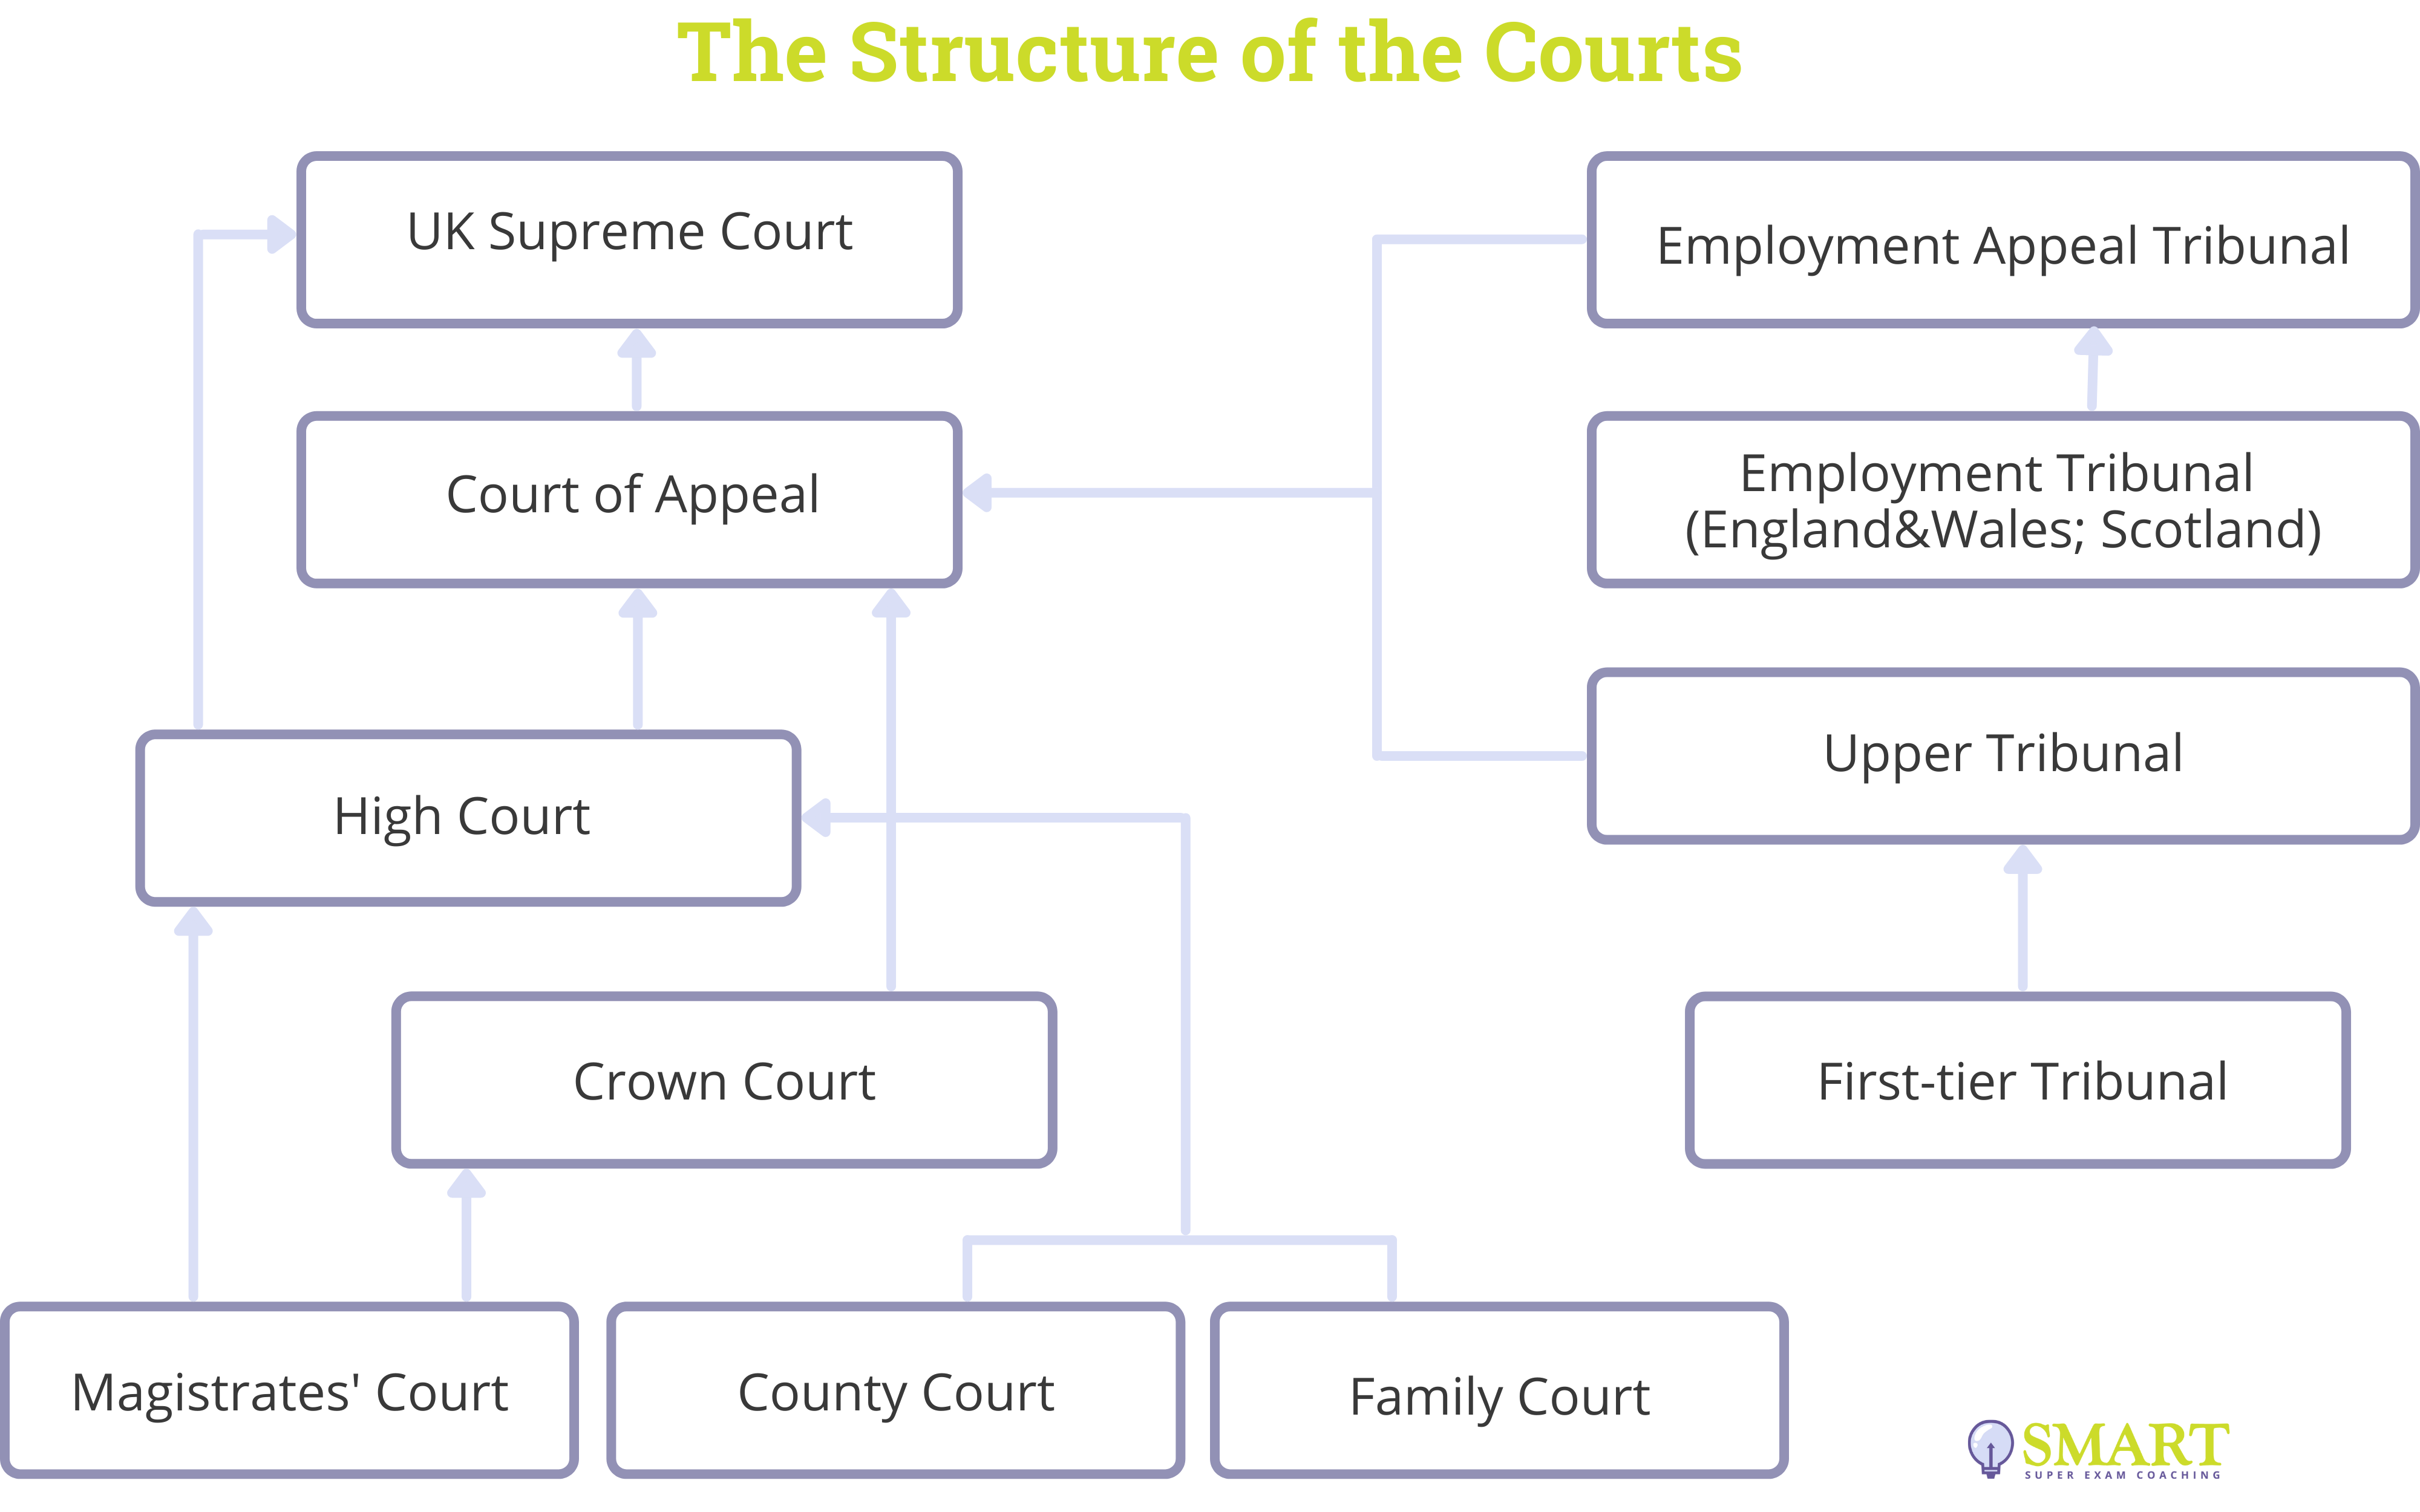 English Legal System - The Structure of The Courts